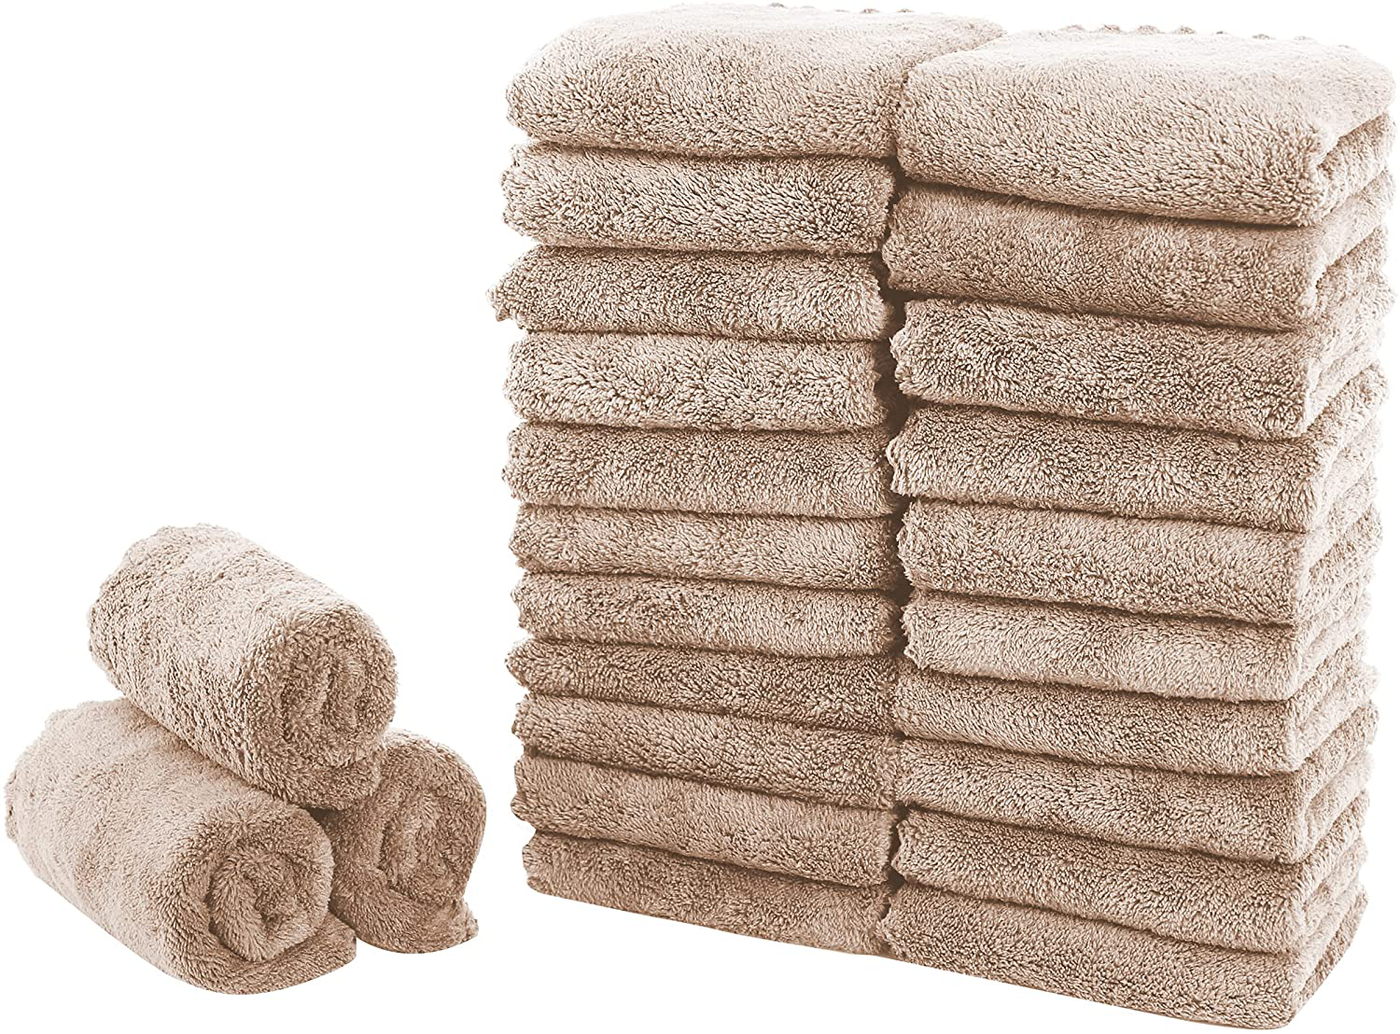 Sunny zzzZZ 24 Pack Kitchen Towels (Brown, 10 x 20 Inch) - Does Not Shed Fluff - No Odor Reusable Dish Towels, Premium Dish Cloths, Super Absorbent Coral Fleece Cleaning Towels